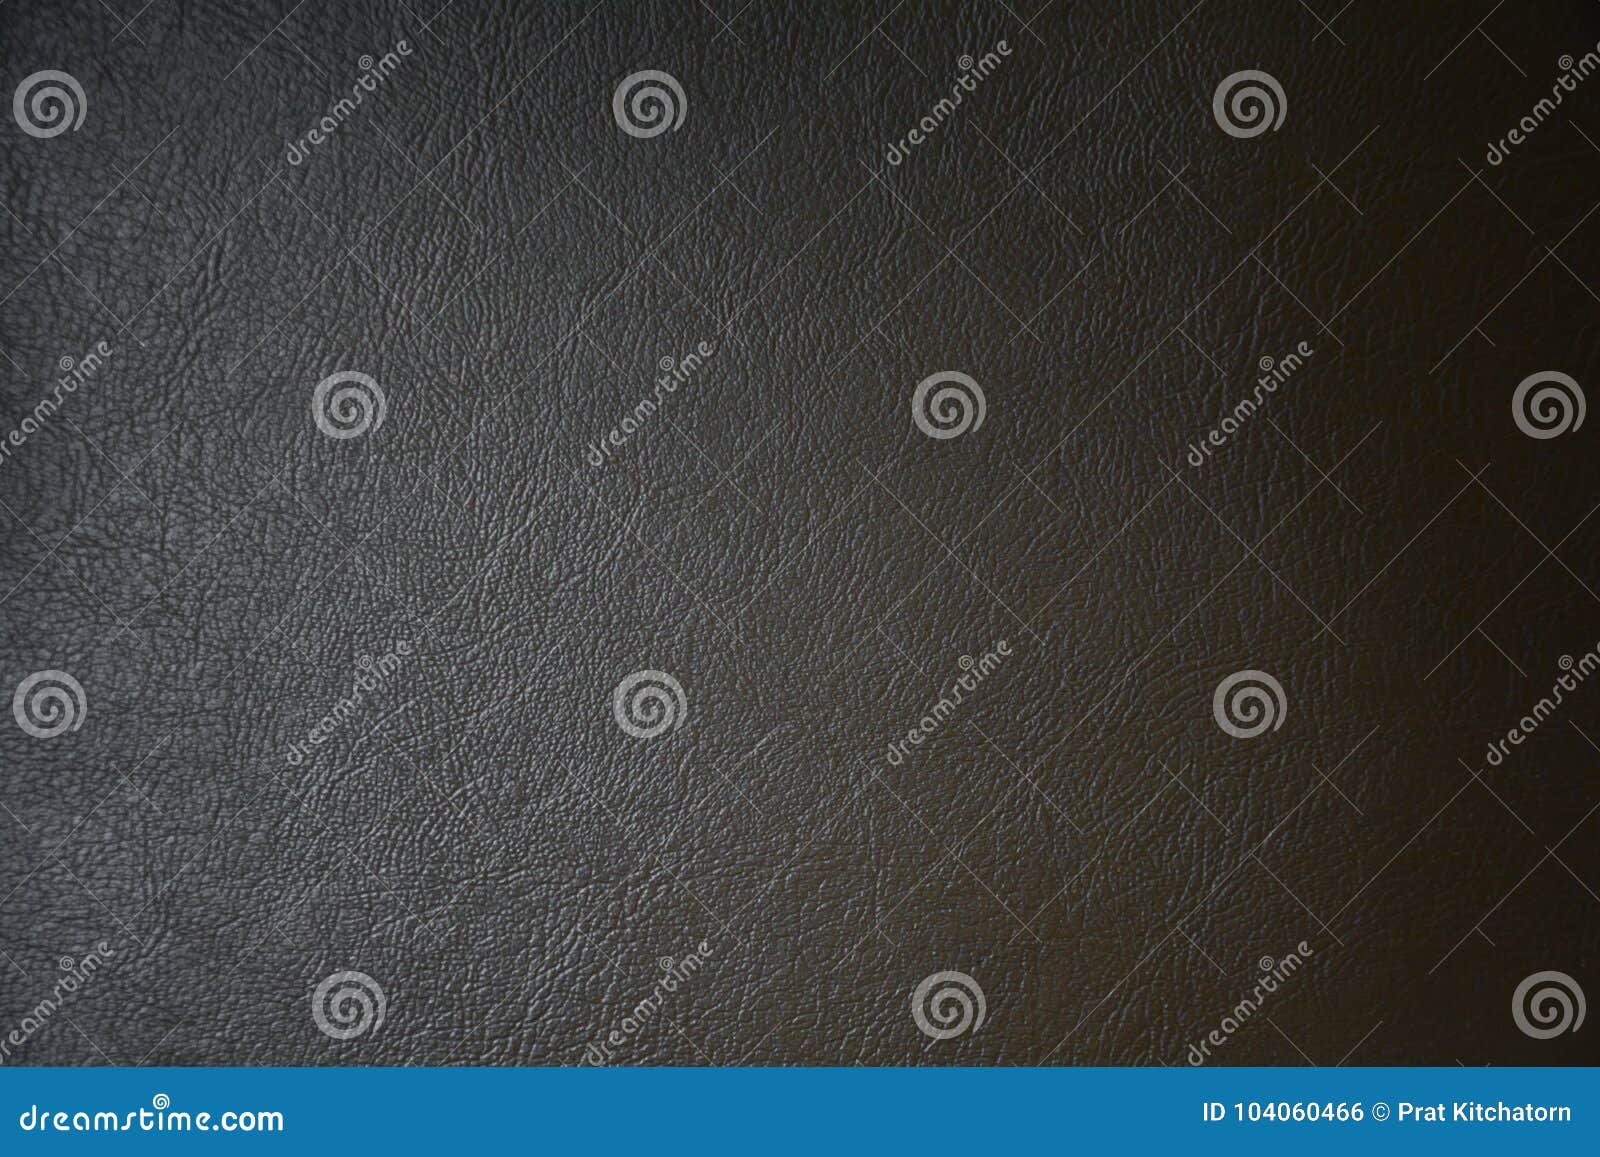 Black Leather Texture Background Pattern Design Black Leather Texture Background 104060466 